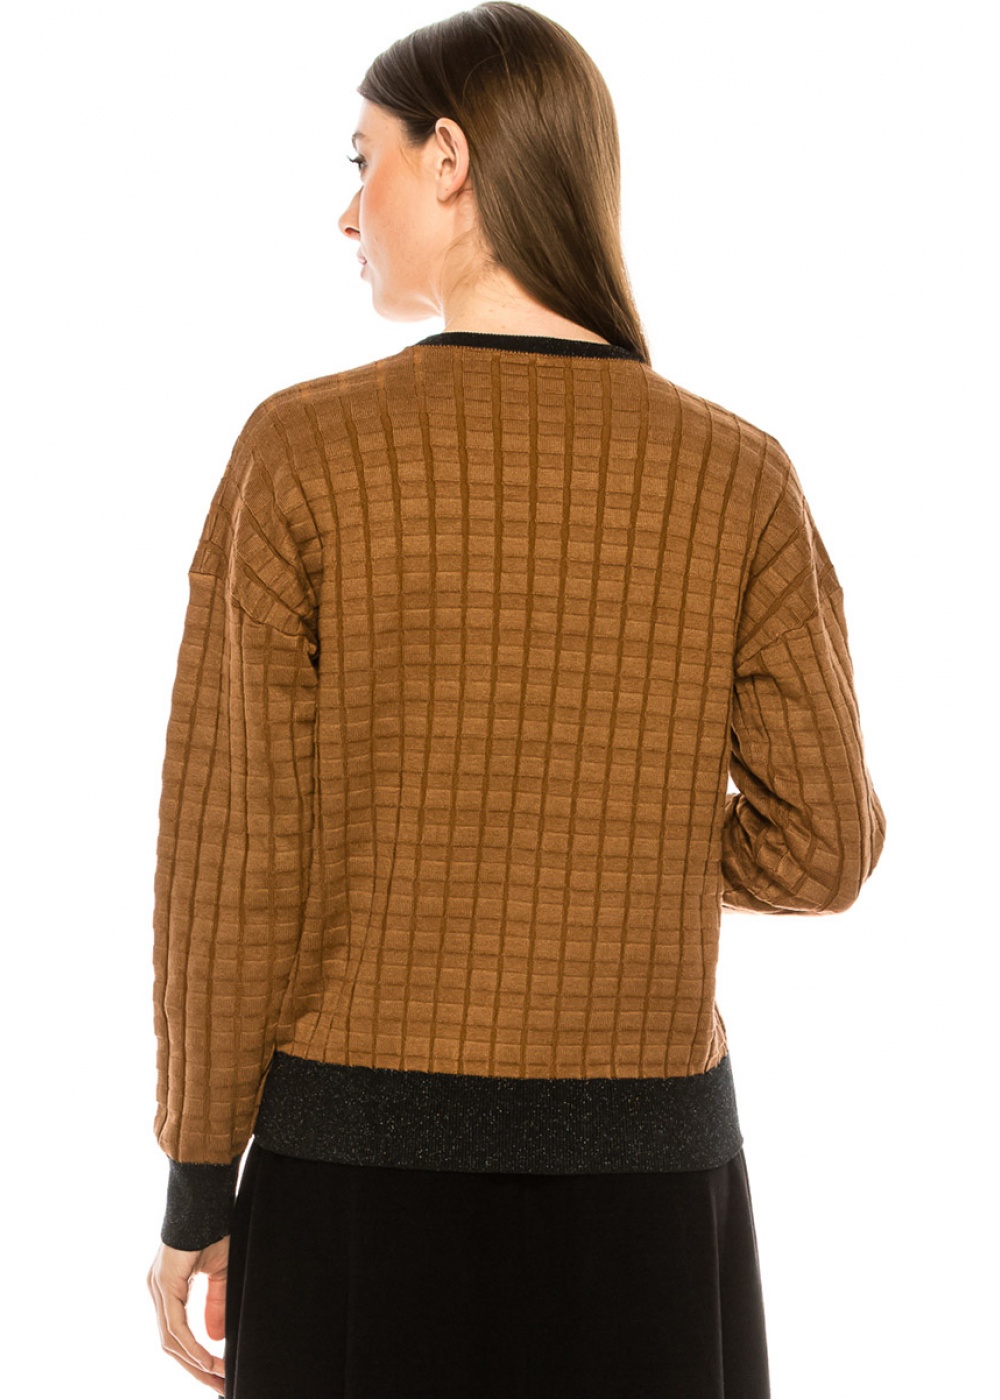 Checkered texture sweater in camel